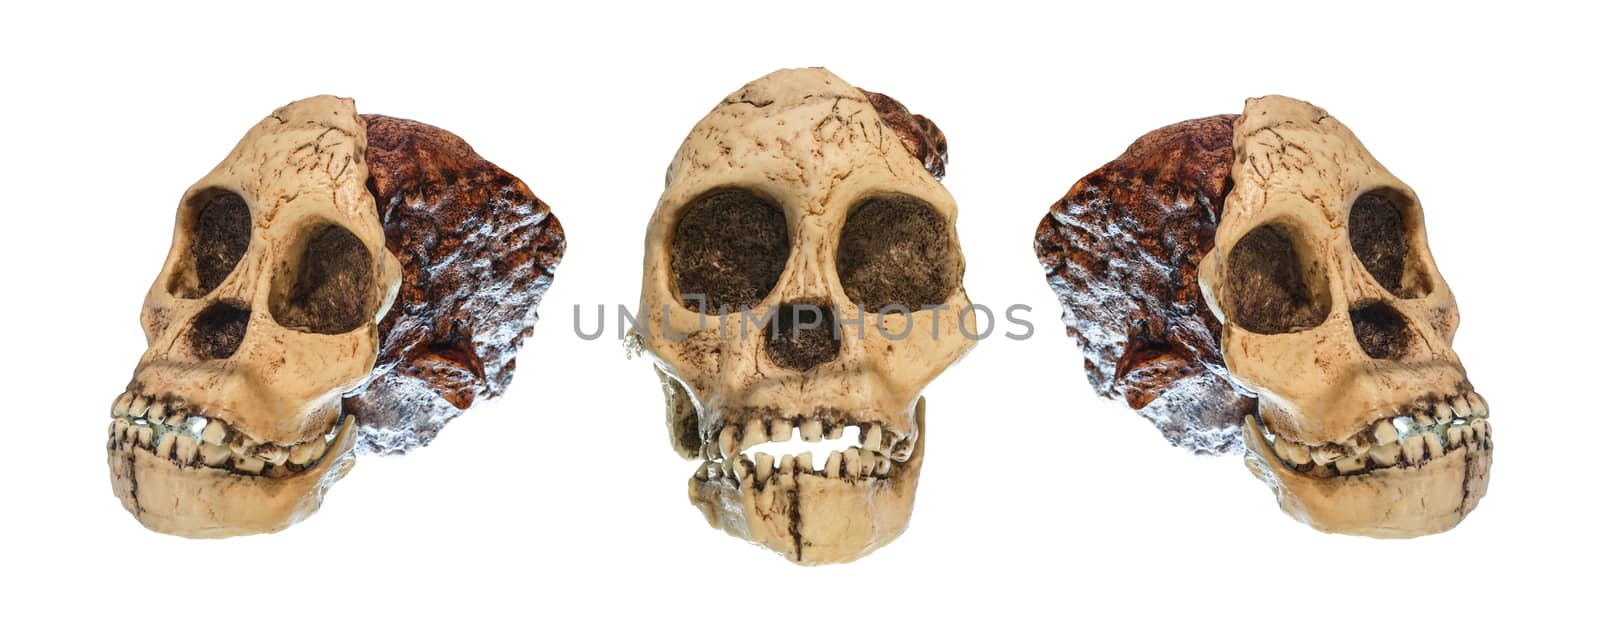 Set of Australopithecus africanus Skull . ( Taung Child ) . Dated to 2.5 million years ago . Discovered in 1924 in a limestone quarry near Taung village , South africa by stockdevil